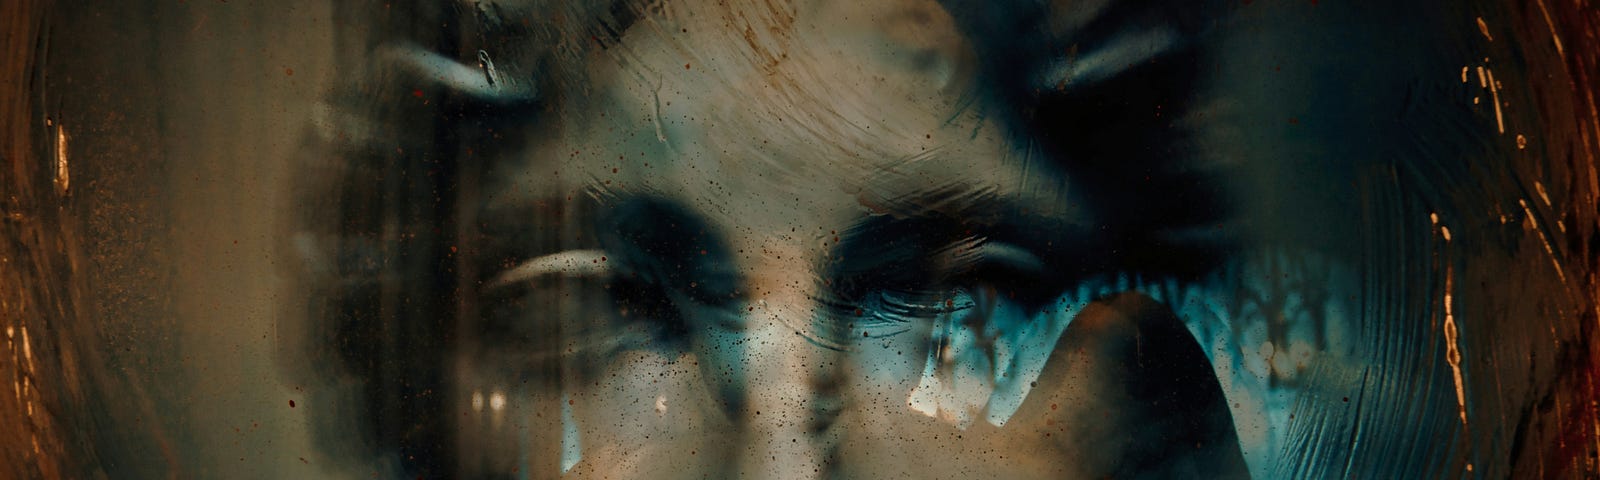 A woman’s eyes gaze through a smeared, blue and black painted glass surface, evoking the fragmented surrealism of a dream.